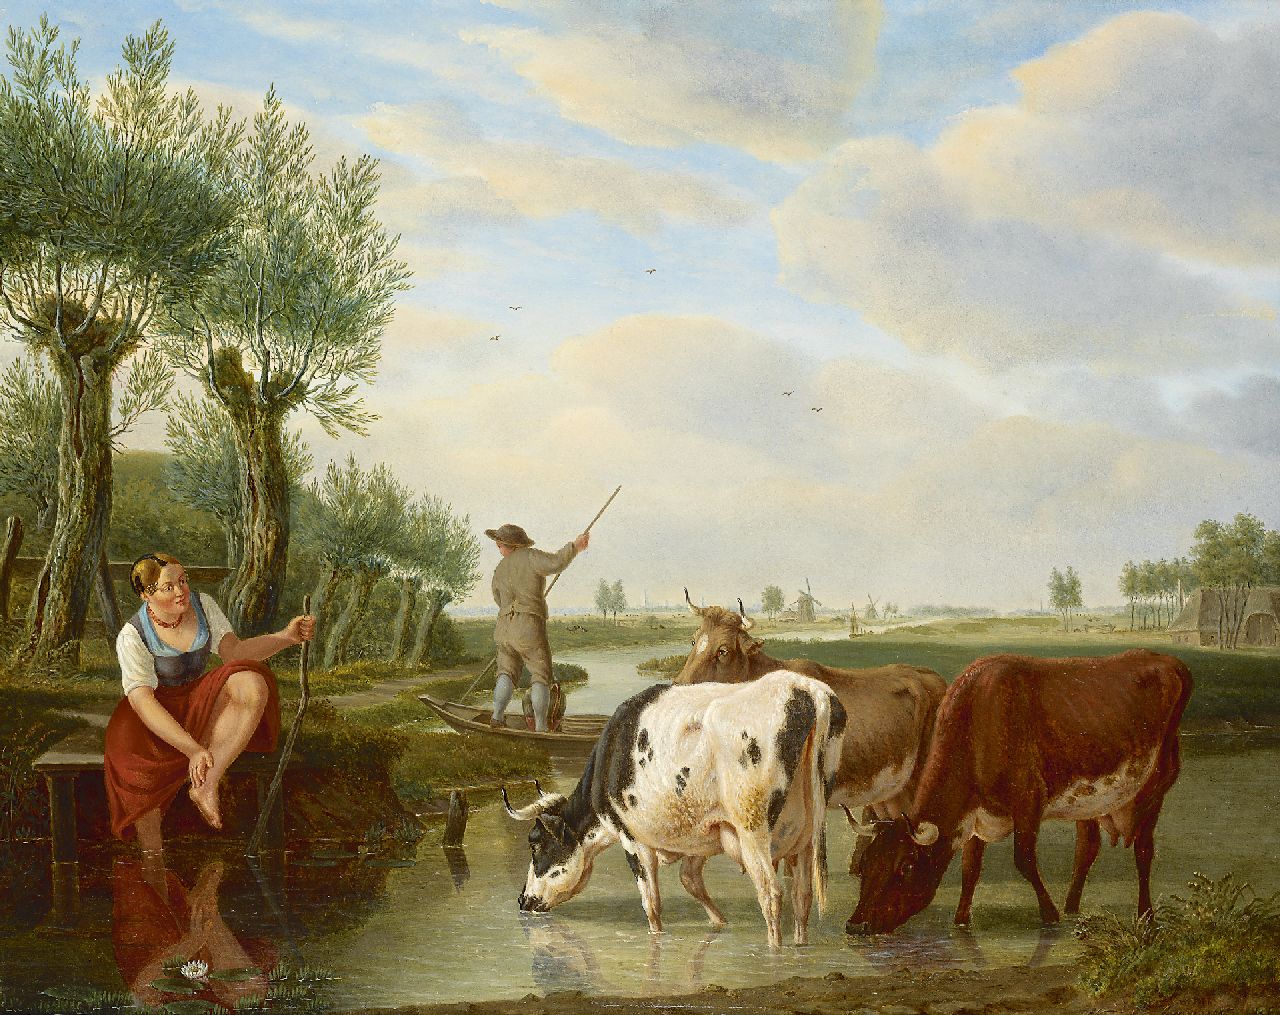 Kuytenbrouwer M.A.  | Martinus Antonius Kuytenbrouwer | Paintings offered for sale | A ferryman and cowherd in a Dutch river landscape, oil on panel 38.8 x 47.3 cm, signed l.r.